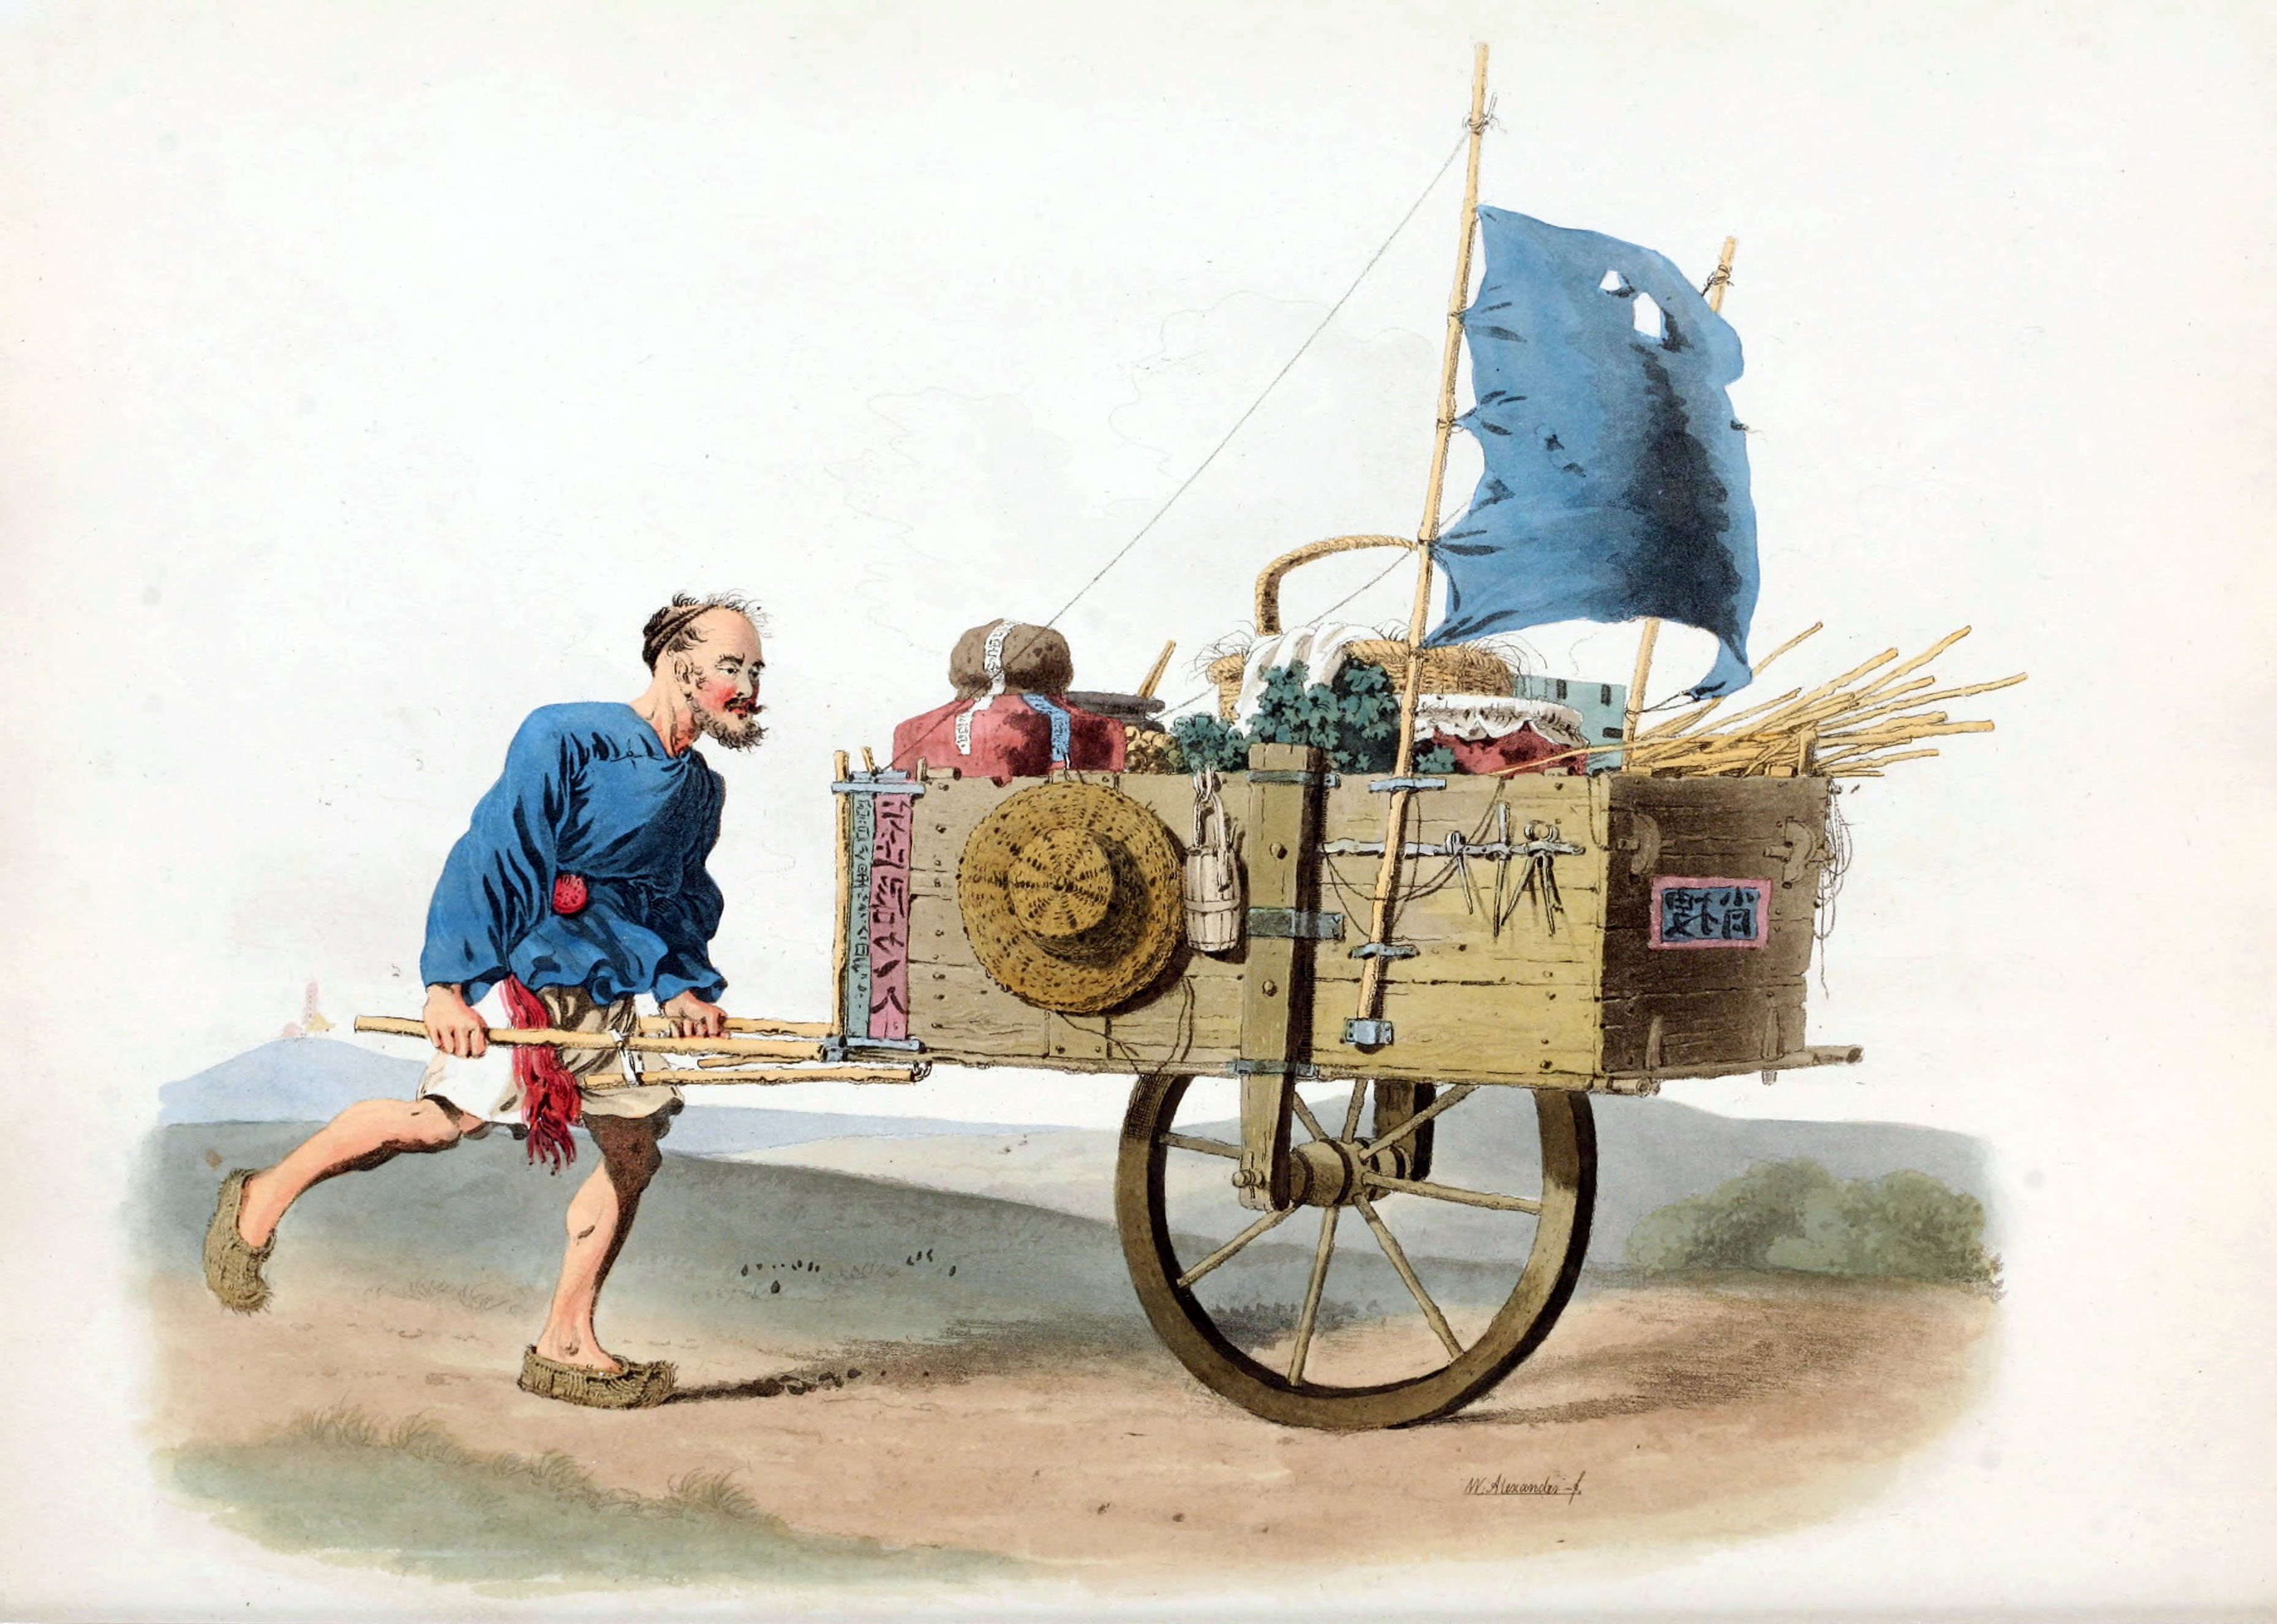 A Chinese wheelbarrow with sails at the turn of the 18th into the 19th century.